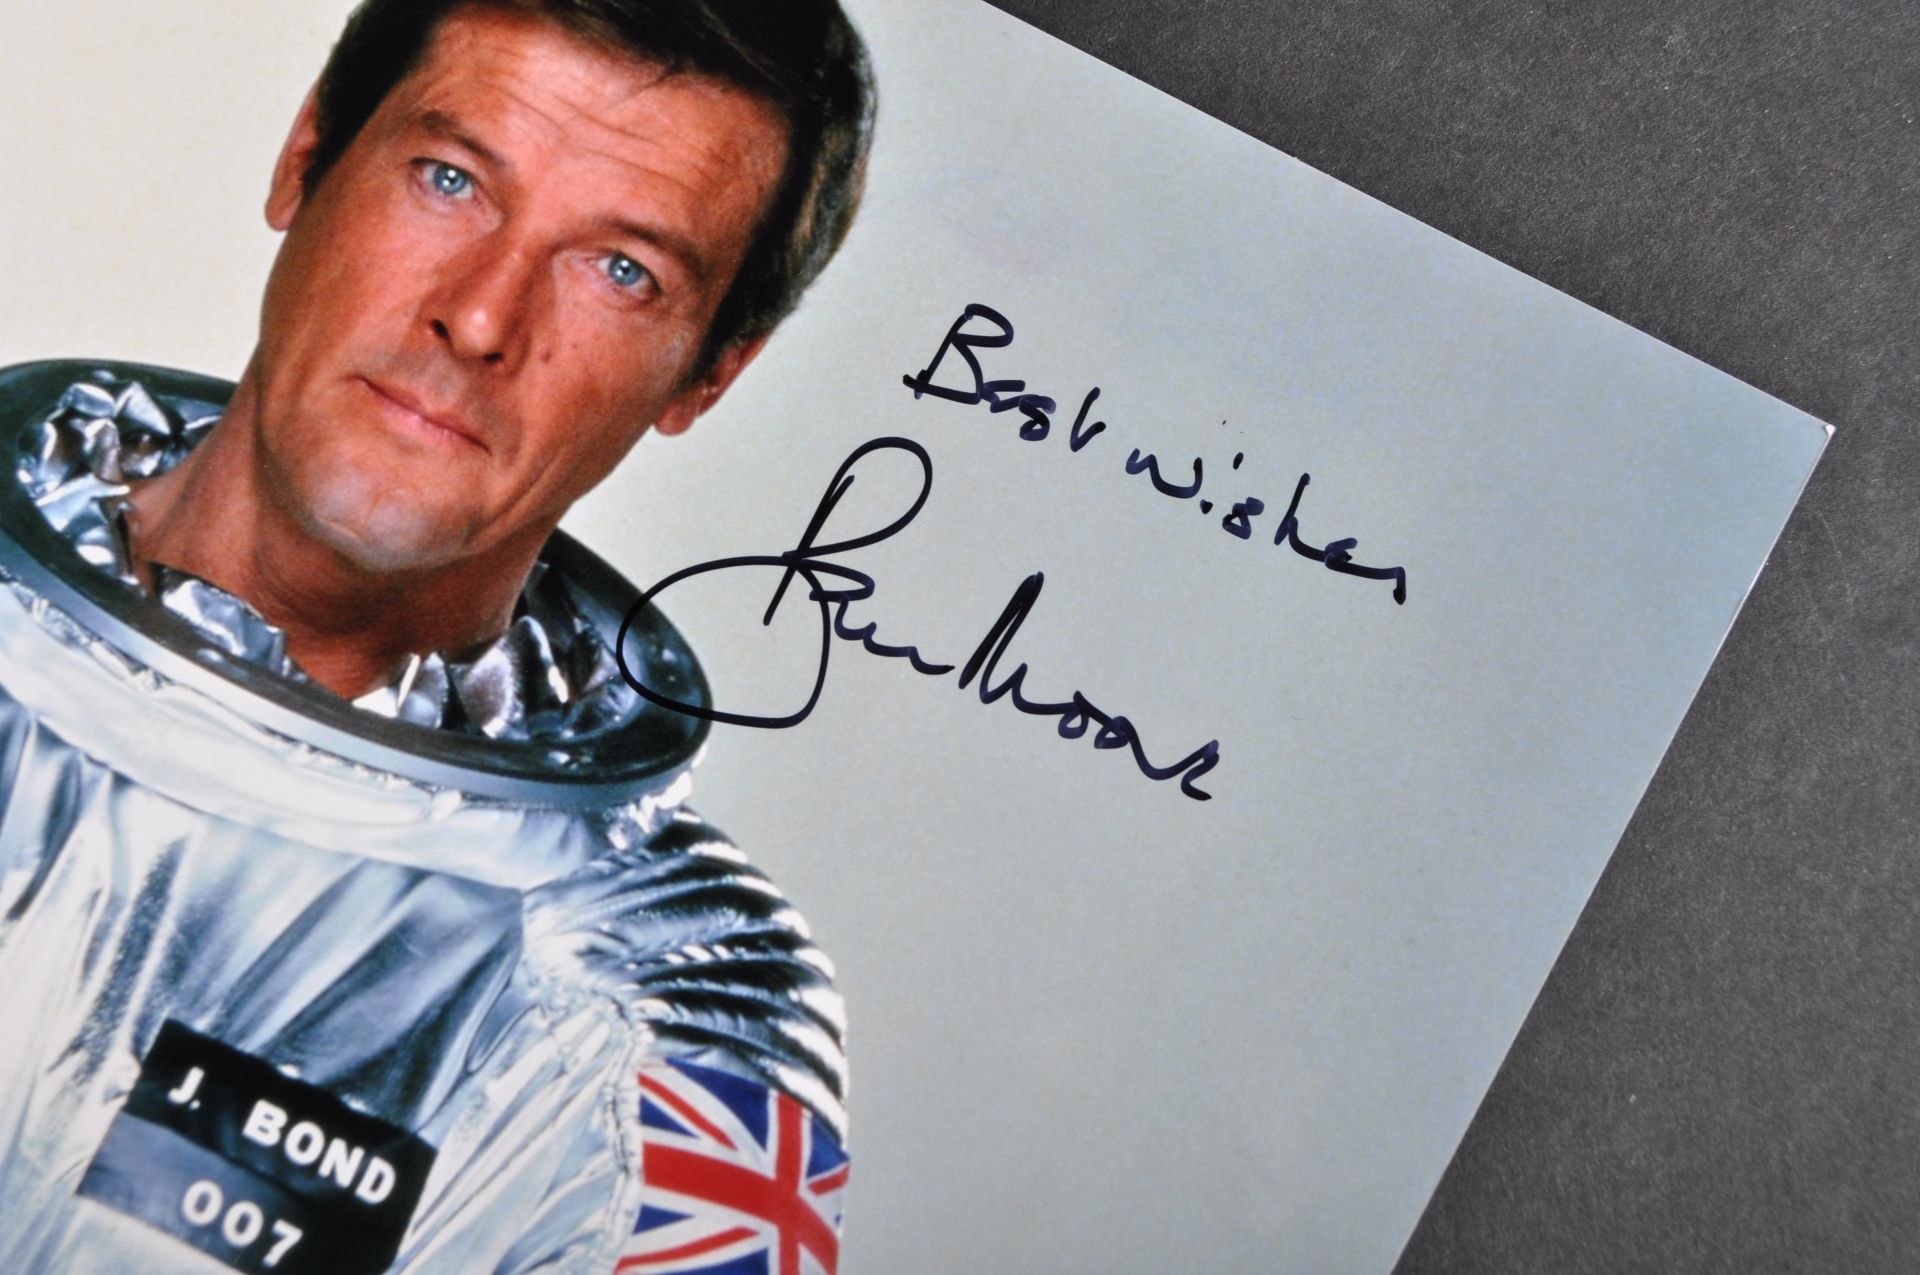 SIR ROGER MOORE - JAMES BOND 007 - AUTOGRAPHED 8X10" - Image 2 of 2